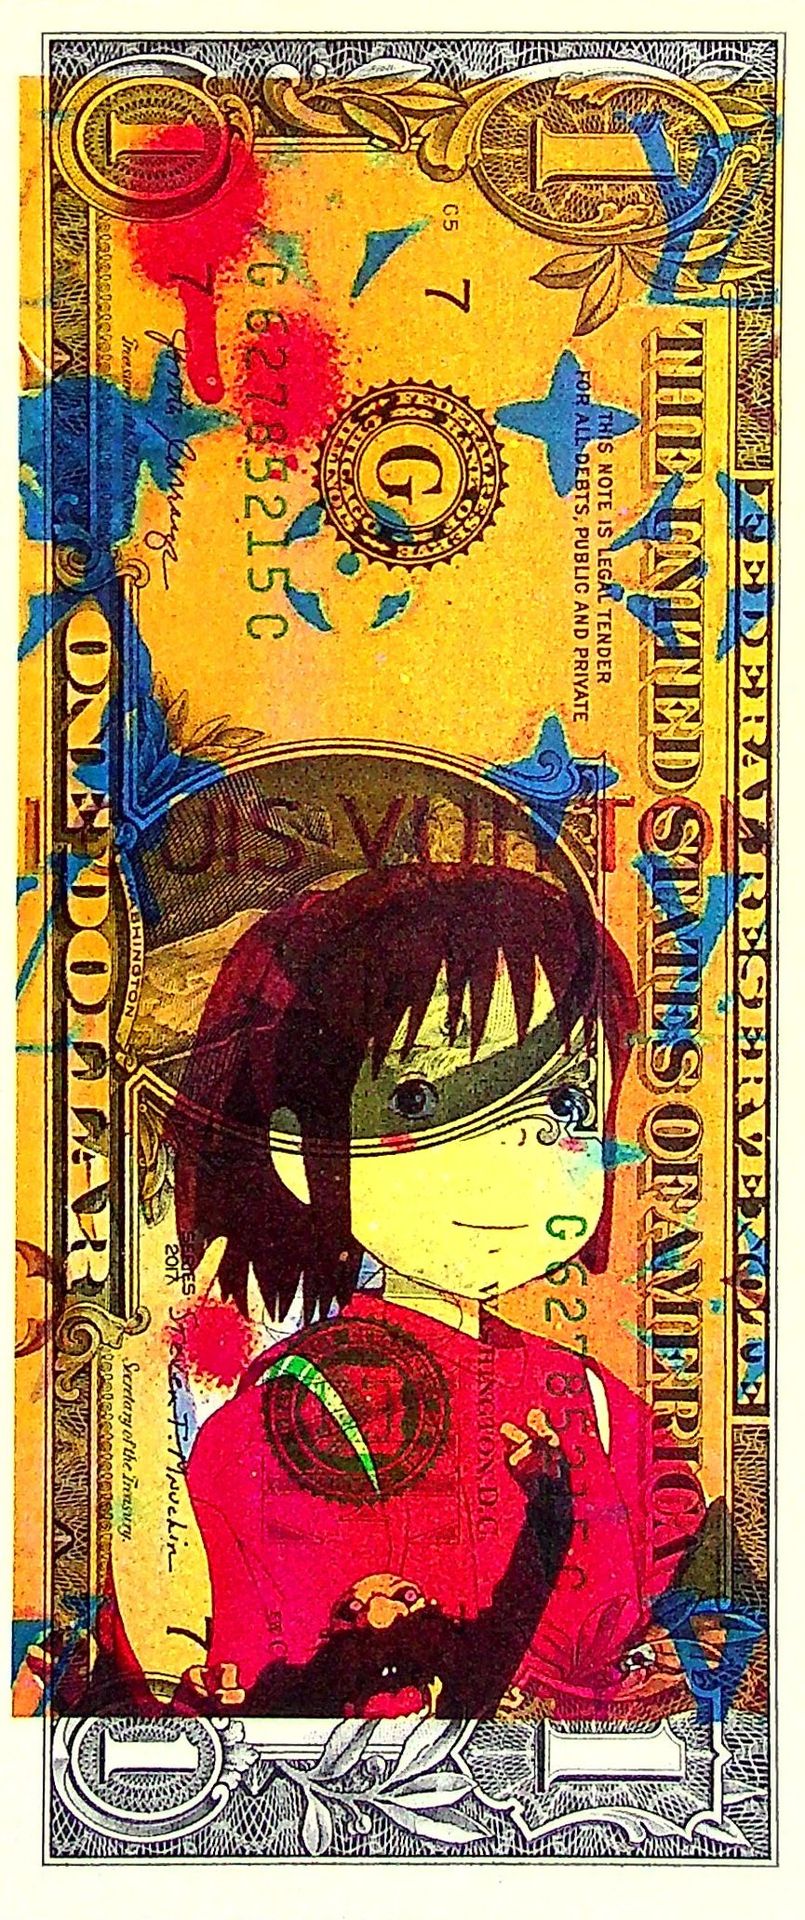 Death NYC Death NYC

Chihiro, 2020

Original serigraph of Death NYC on a 1$ bill&hellip;